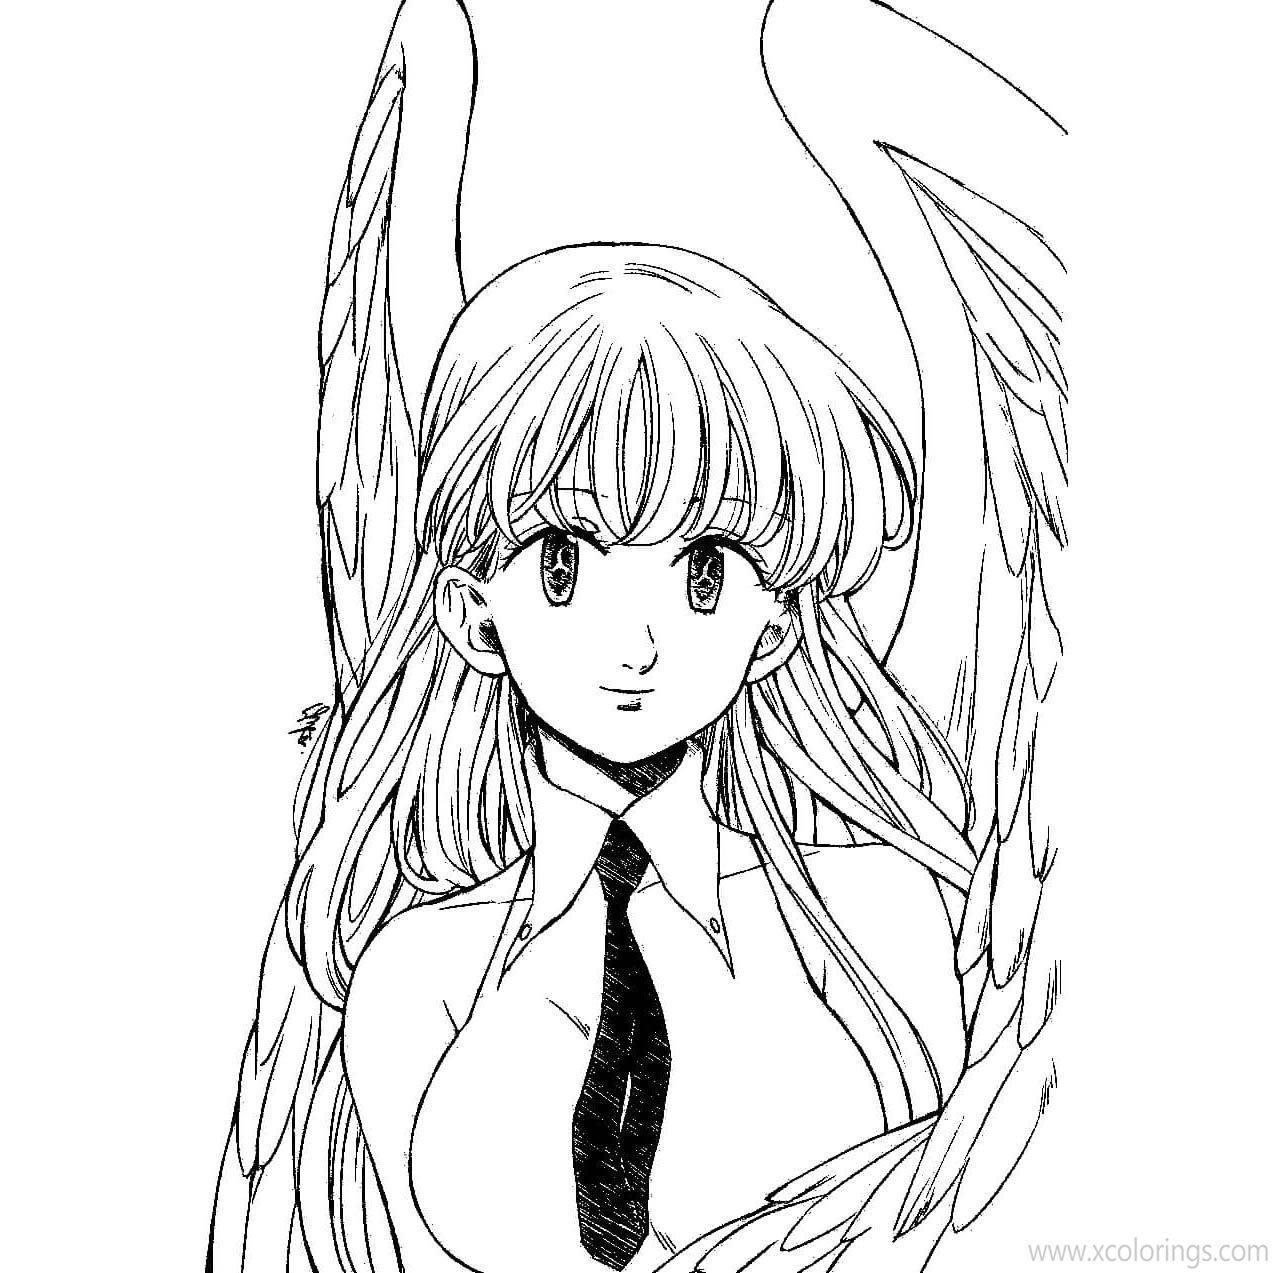 Free Elizabeth from The Seven Deadly Sins Coloring Pages printable